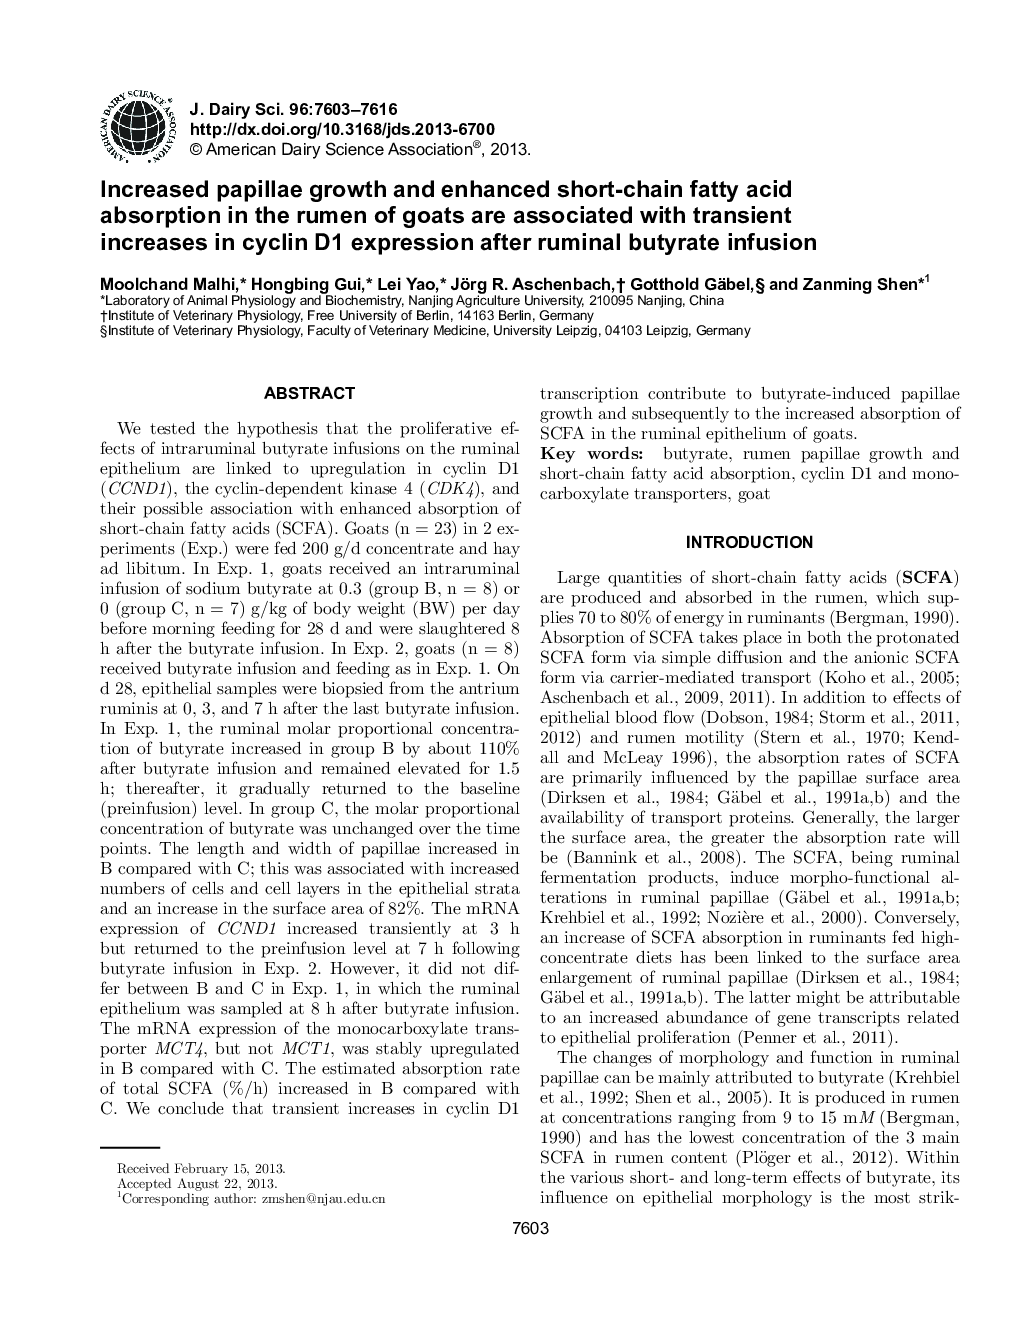 Increased papillae growth and enhanced short-chain fatty acid absorption in the rumen of goats are associated with transient increases in cyclin D1 expression after ruminal butyrate infusion